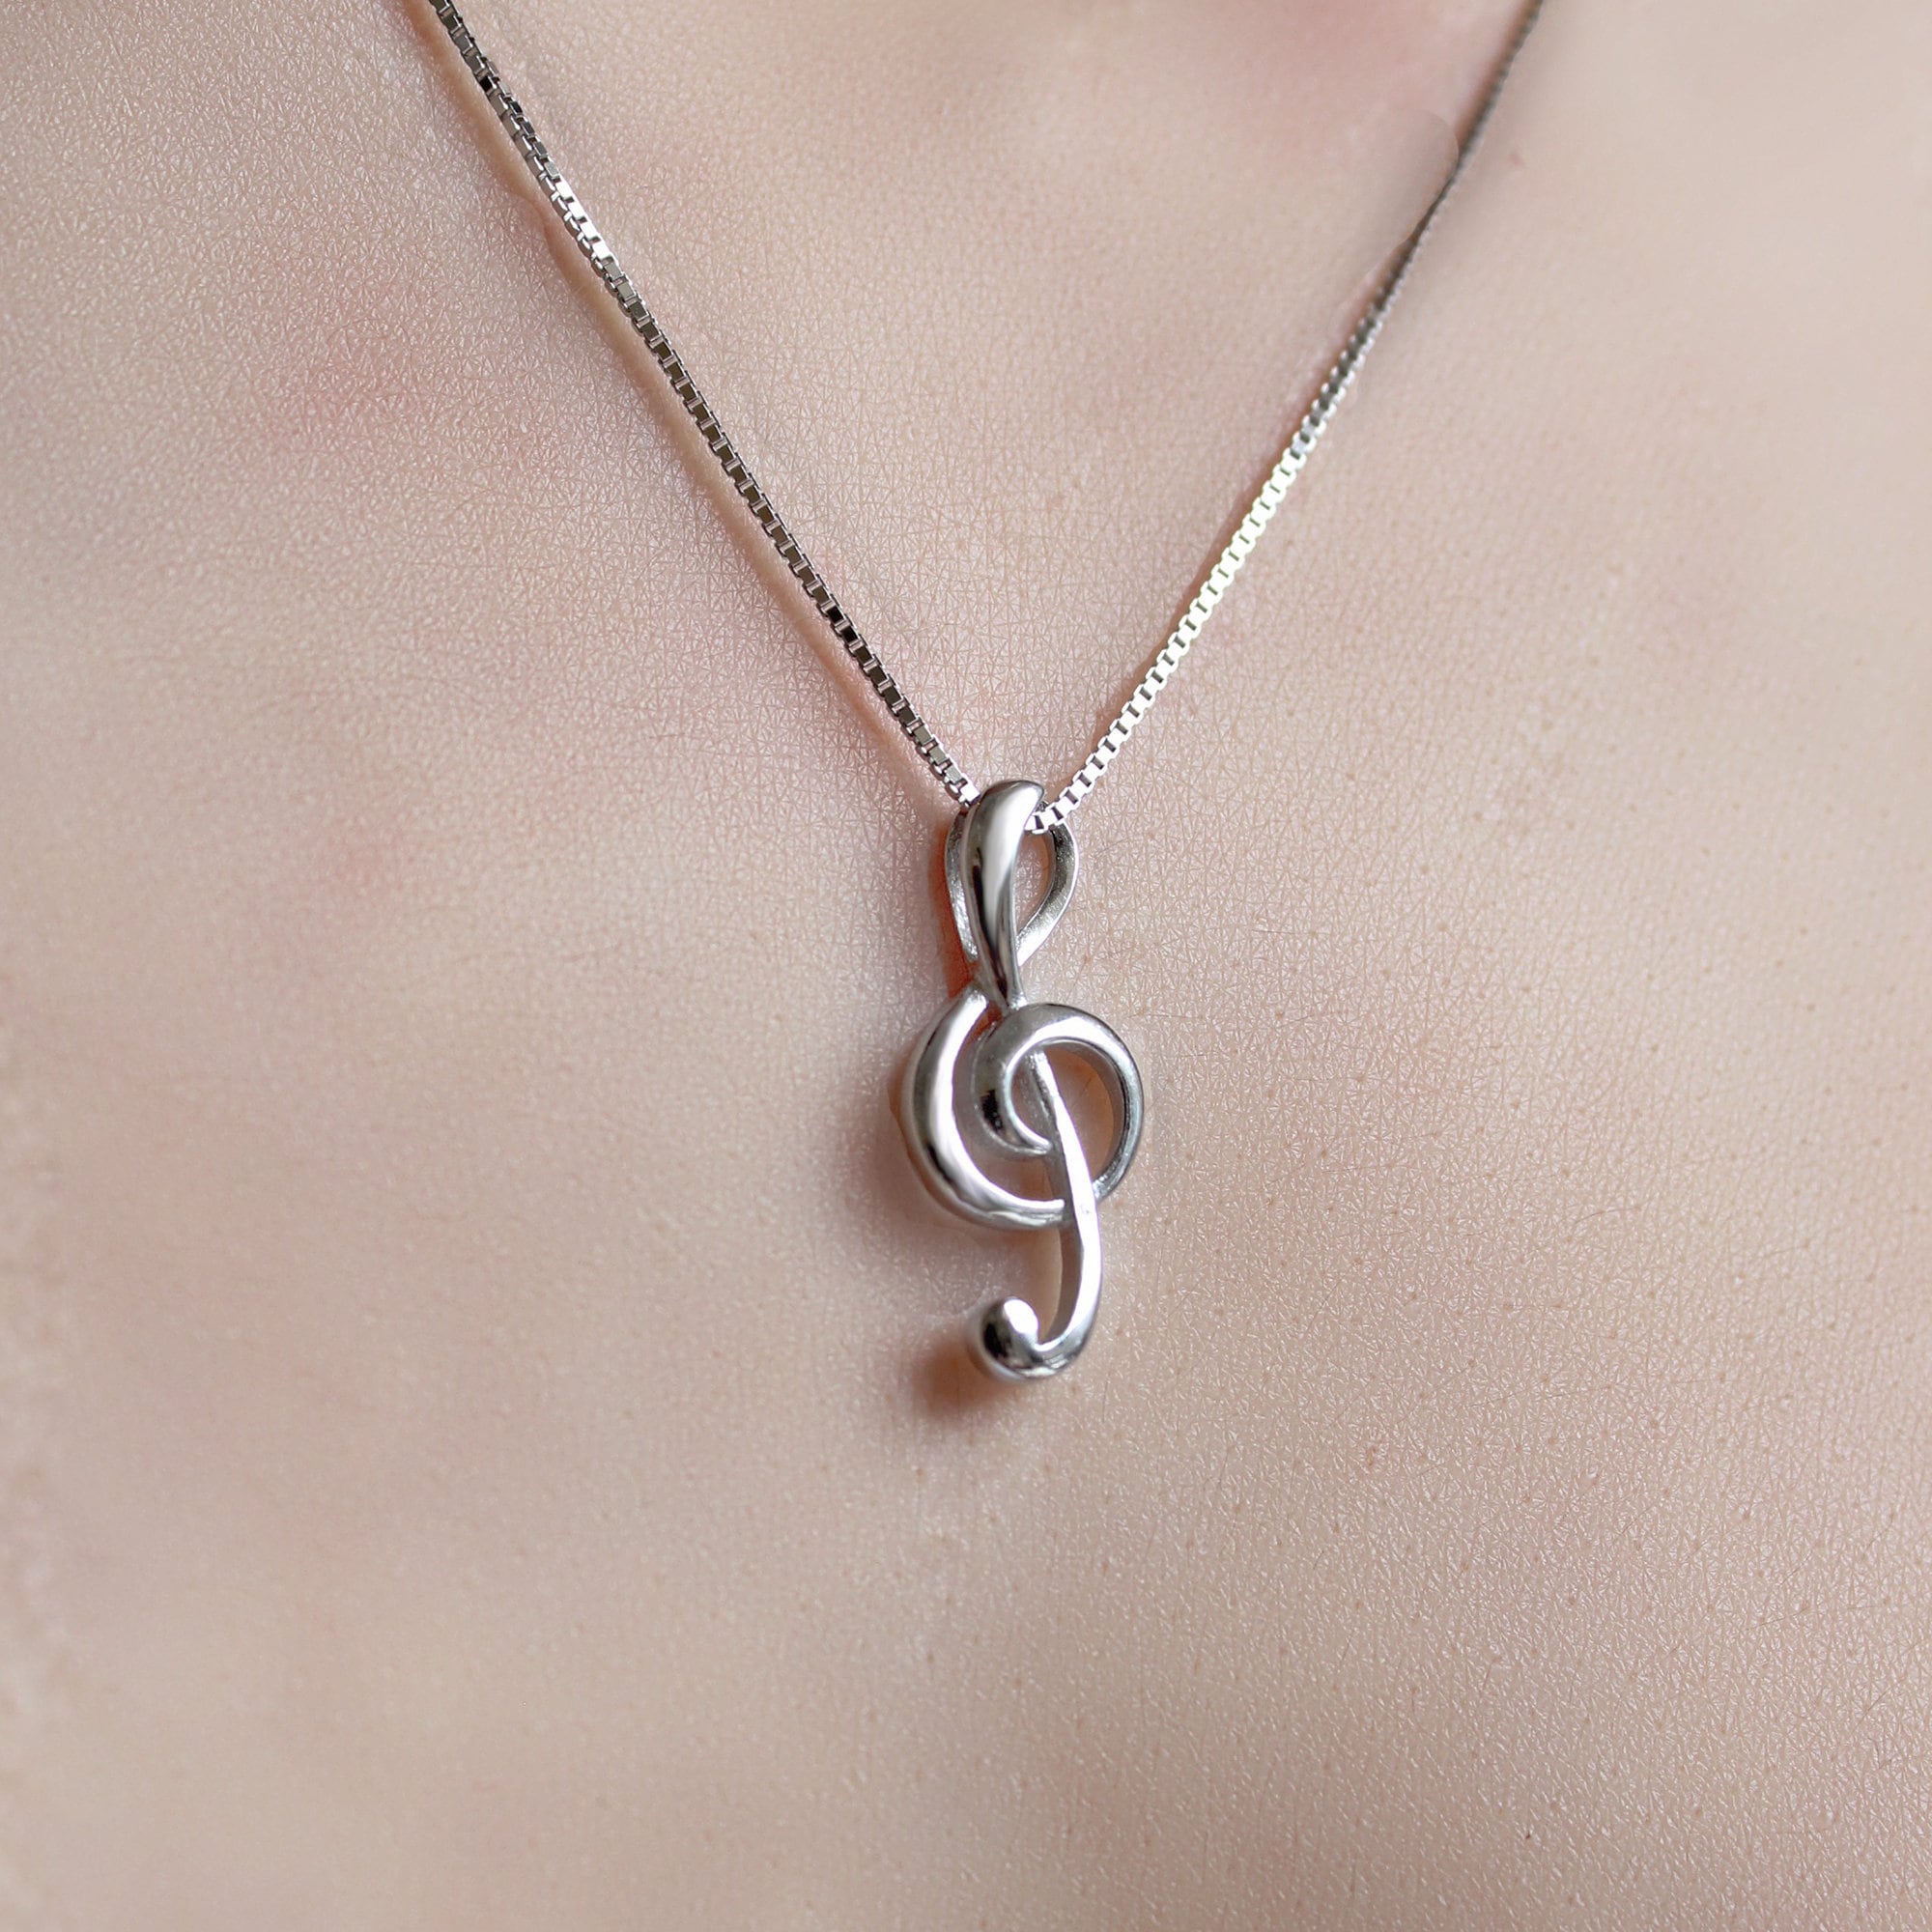 Music Note Necklace of Sterling Silver Personalized Musical - Etsy | Music  note necklace, Music note jewelry, Pendant